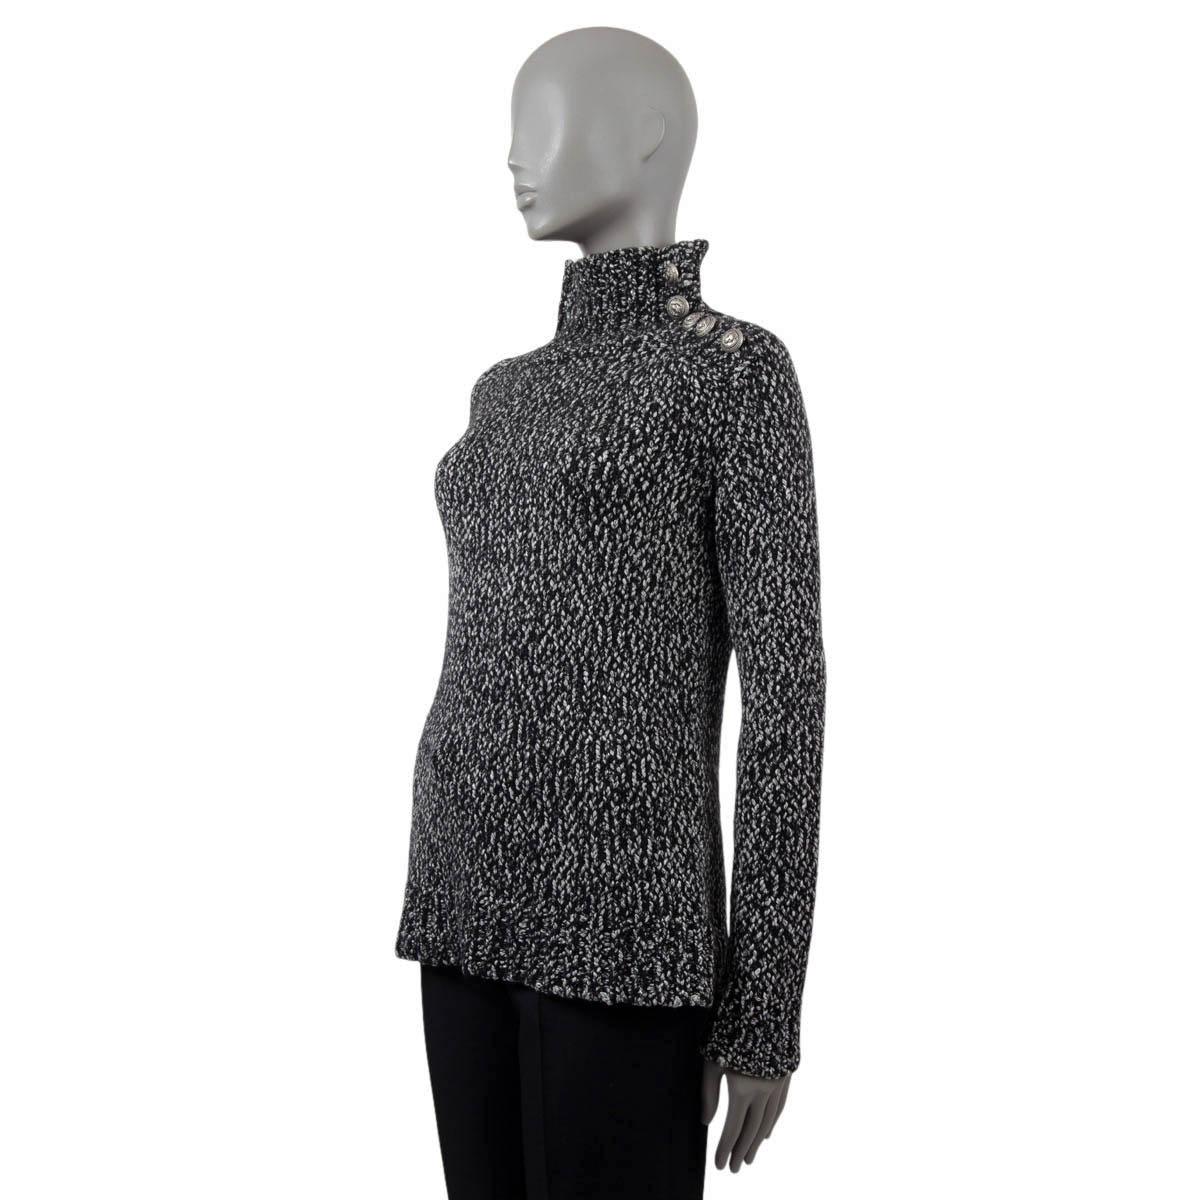 BALMAIN black & white cotton BUTTONED TURTLENECK Sweater 36 XS In Excellent Condition For Sale In Zürich, CH